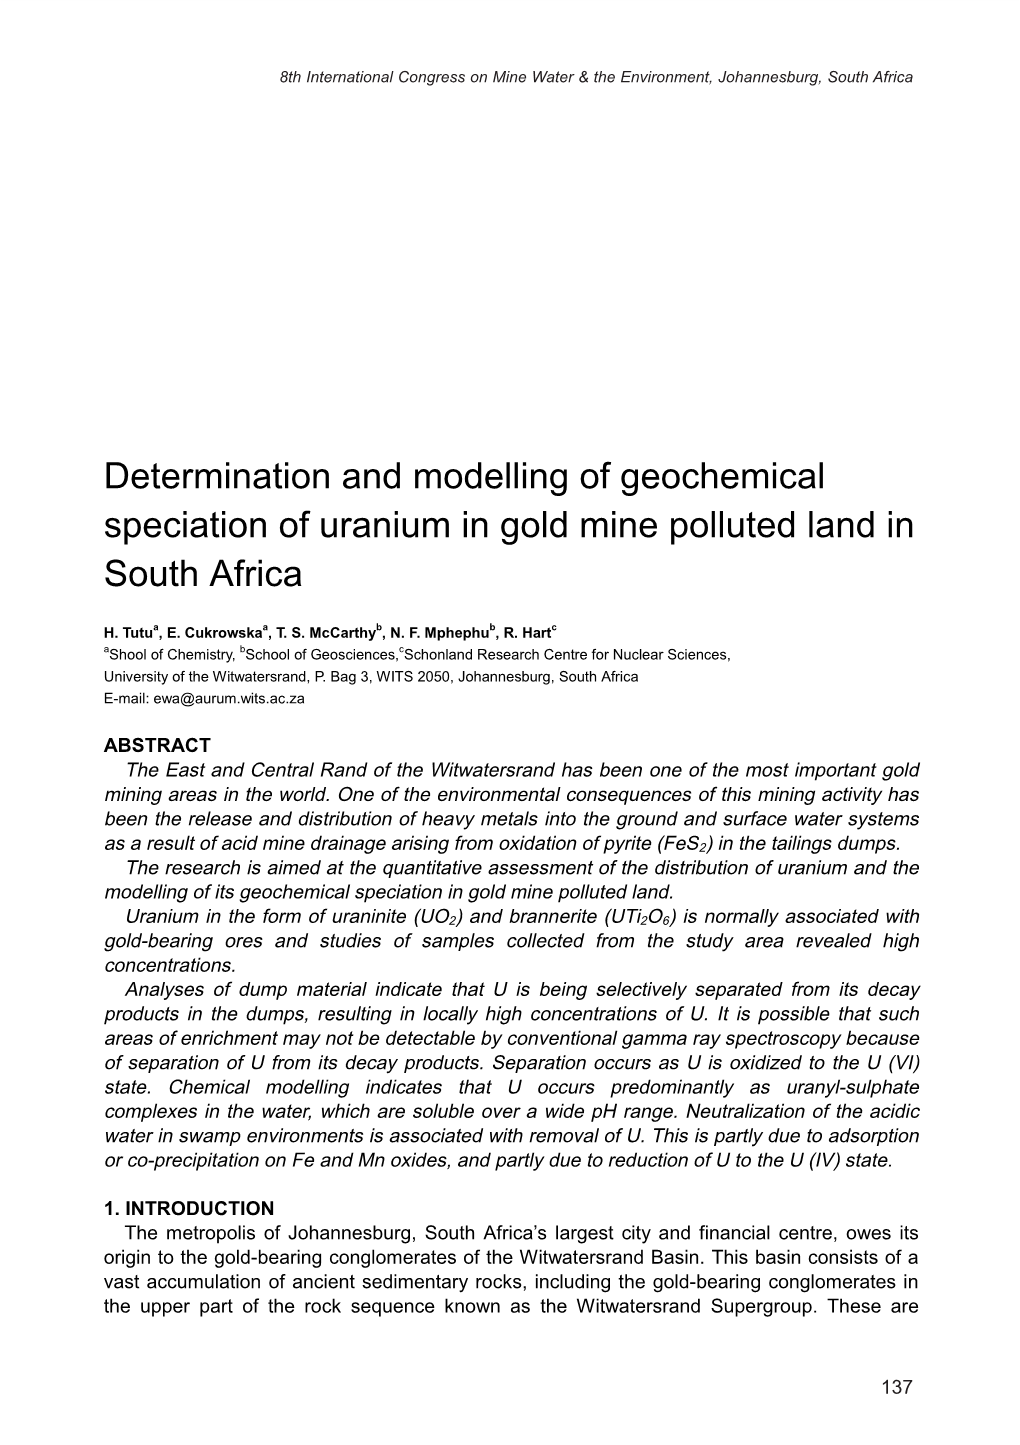 Determination and Modelling of Geochemical Speciation of Uranium in Gold Mine Polluted Land in South Africa